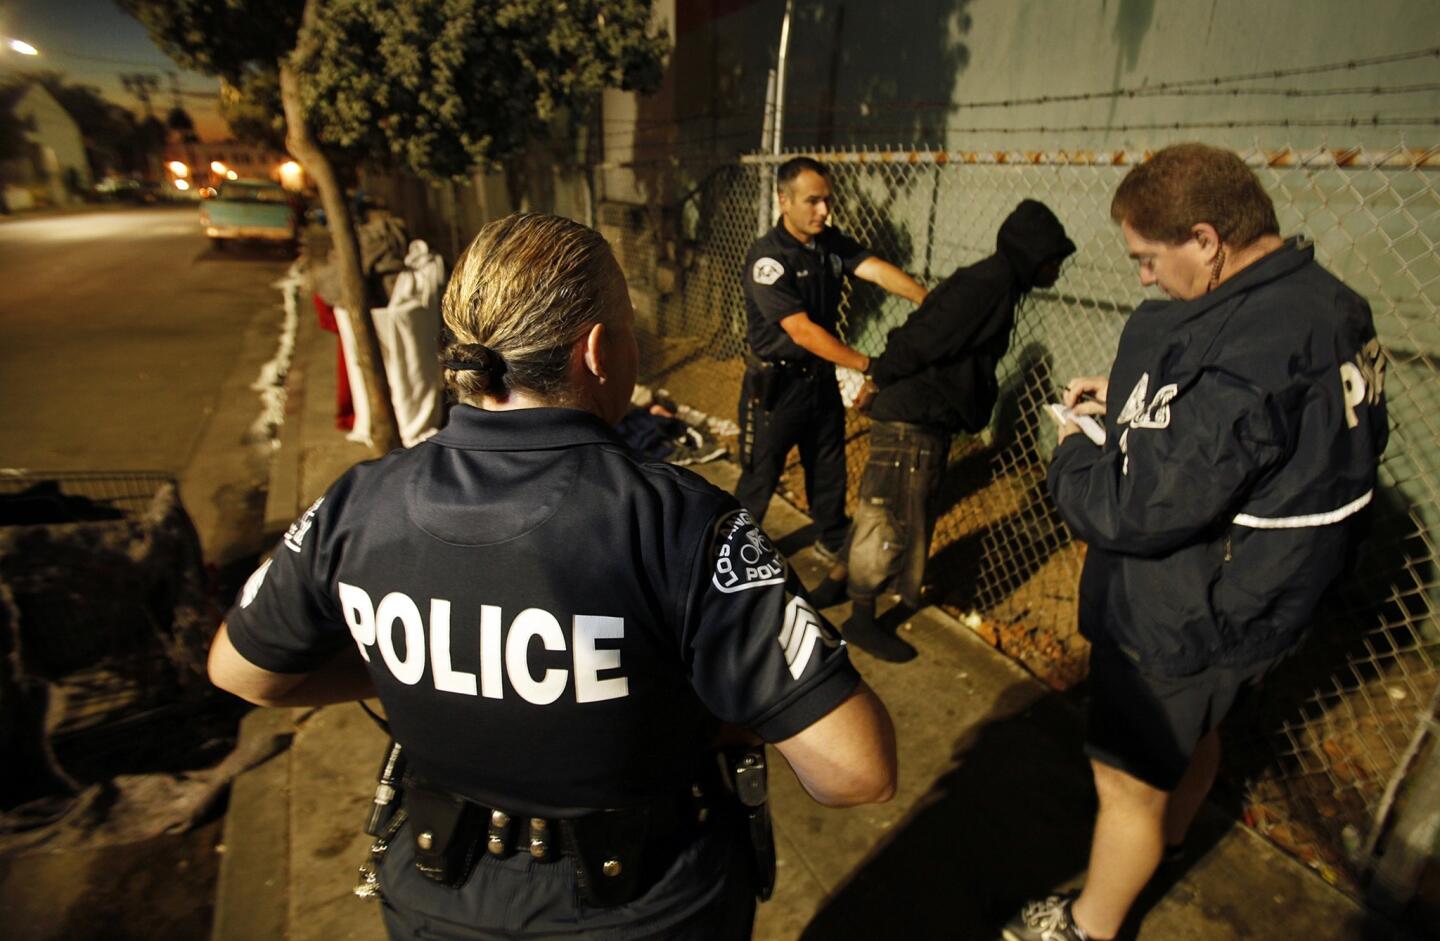 LAPD Sgt. Theresa Skinner, left, supervises as officers detain Chesnel Dorceus while waking up homeless people sleeping along 3rd near Rose Avenue. Under a 2007 court settlement, homeless people may sleep on sidewalks in the city of Los Angeles as long as they move on by 6 a.m. When they don't, officers may find themselves on wake-up patrol.